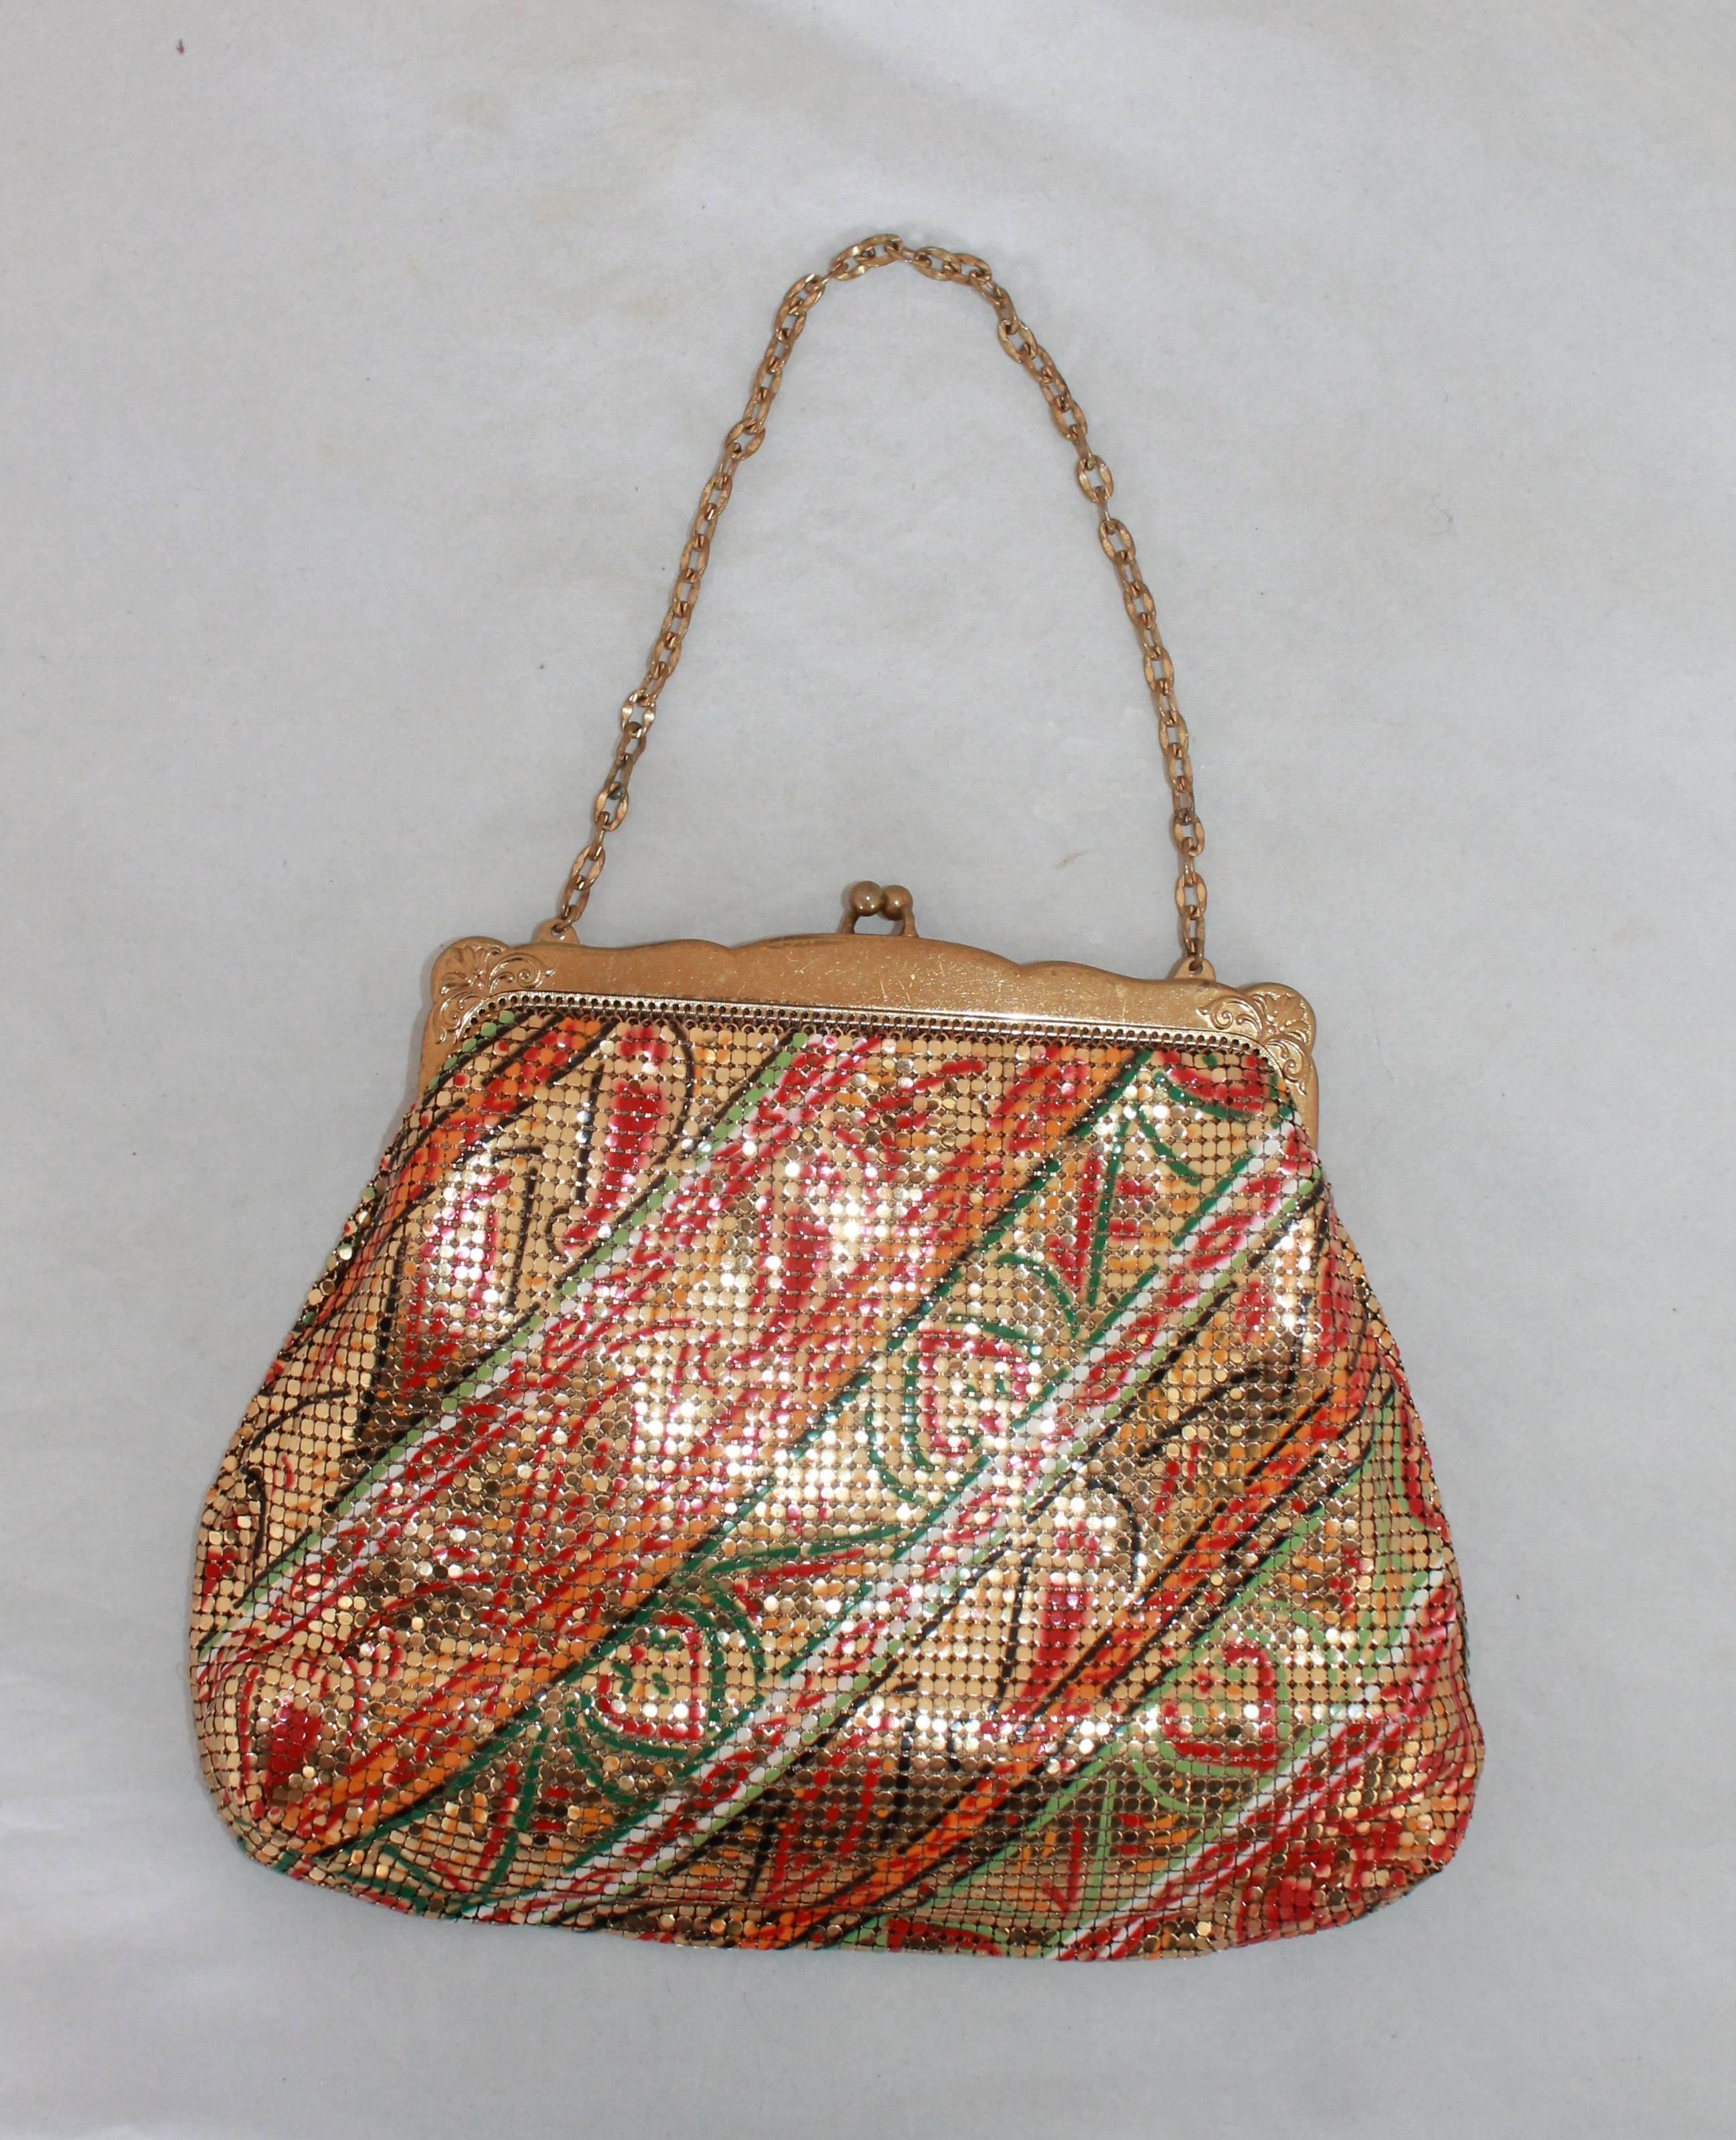 Whiting & Davis 1940's Vintage Multicolor Paisley Gold Mesh Bag. This bag is in good vintage condition and has wear consistent with its age, the one area that is noticeable is an area of tarnishing on the top portion as seen in the images. It has a